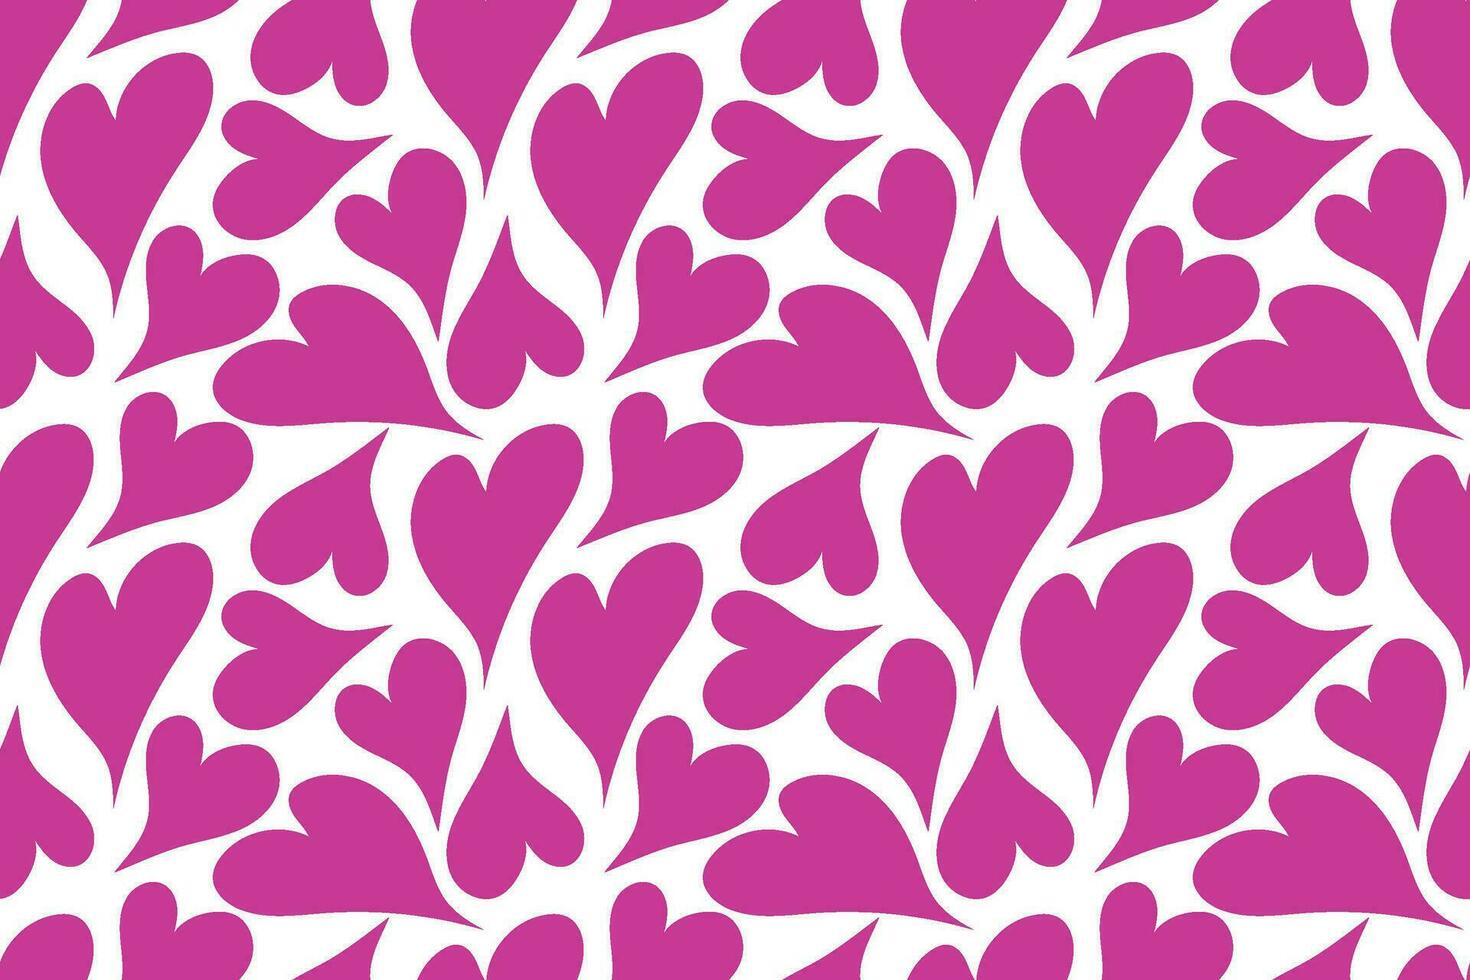 Seamless valentines day pattern. Pink groovy hearts. Universal holiday pattern vector